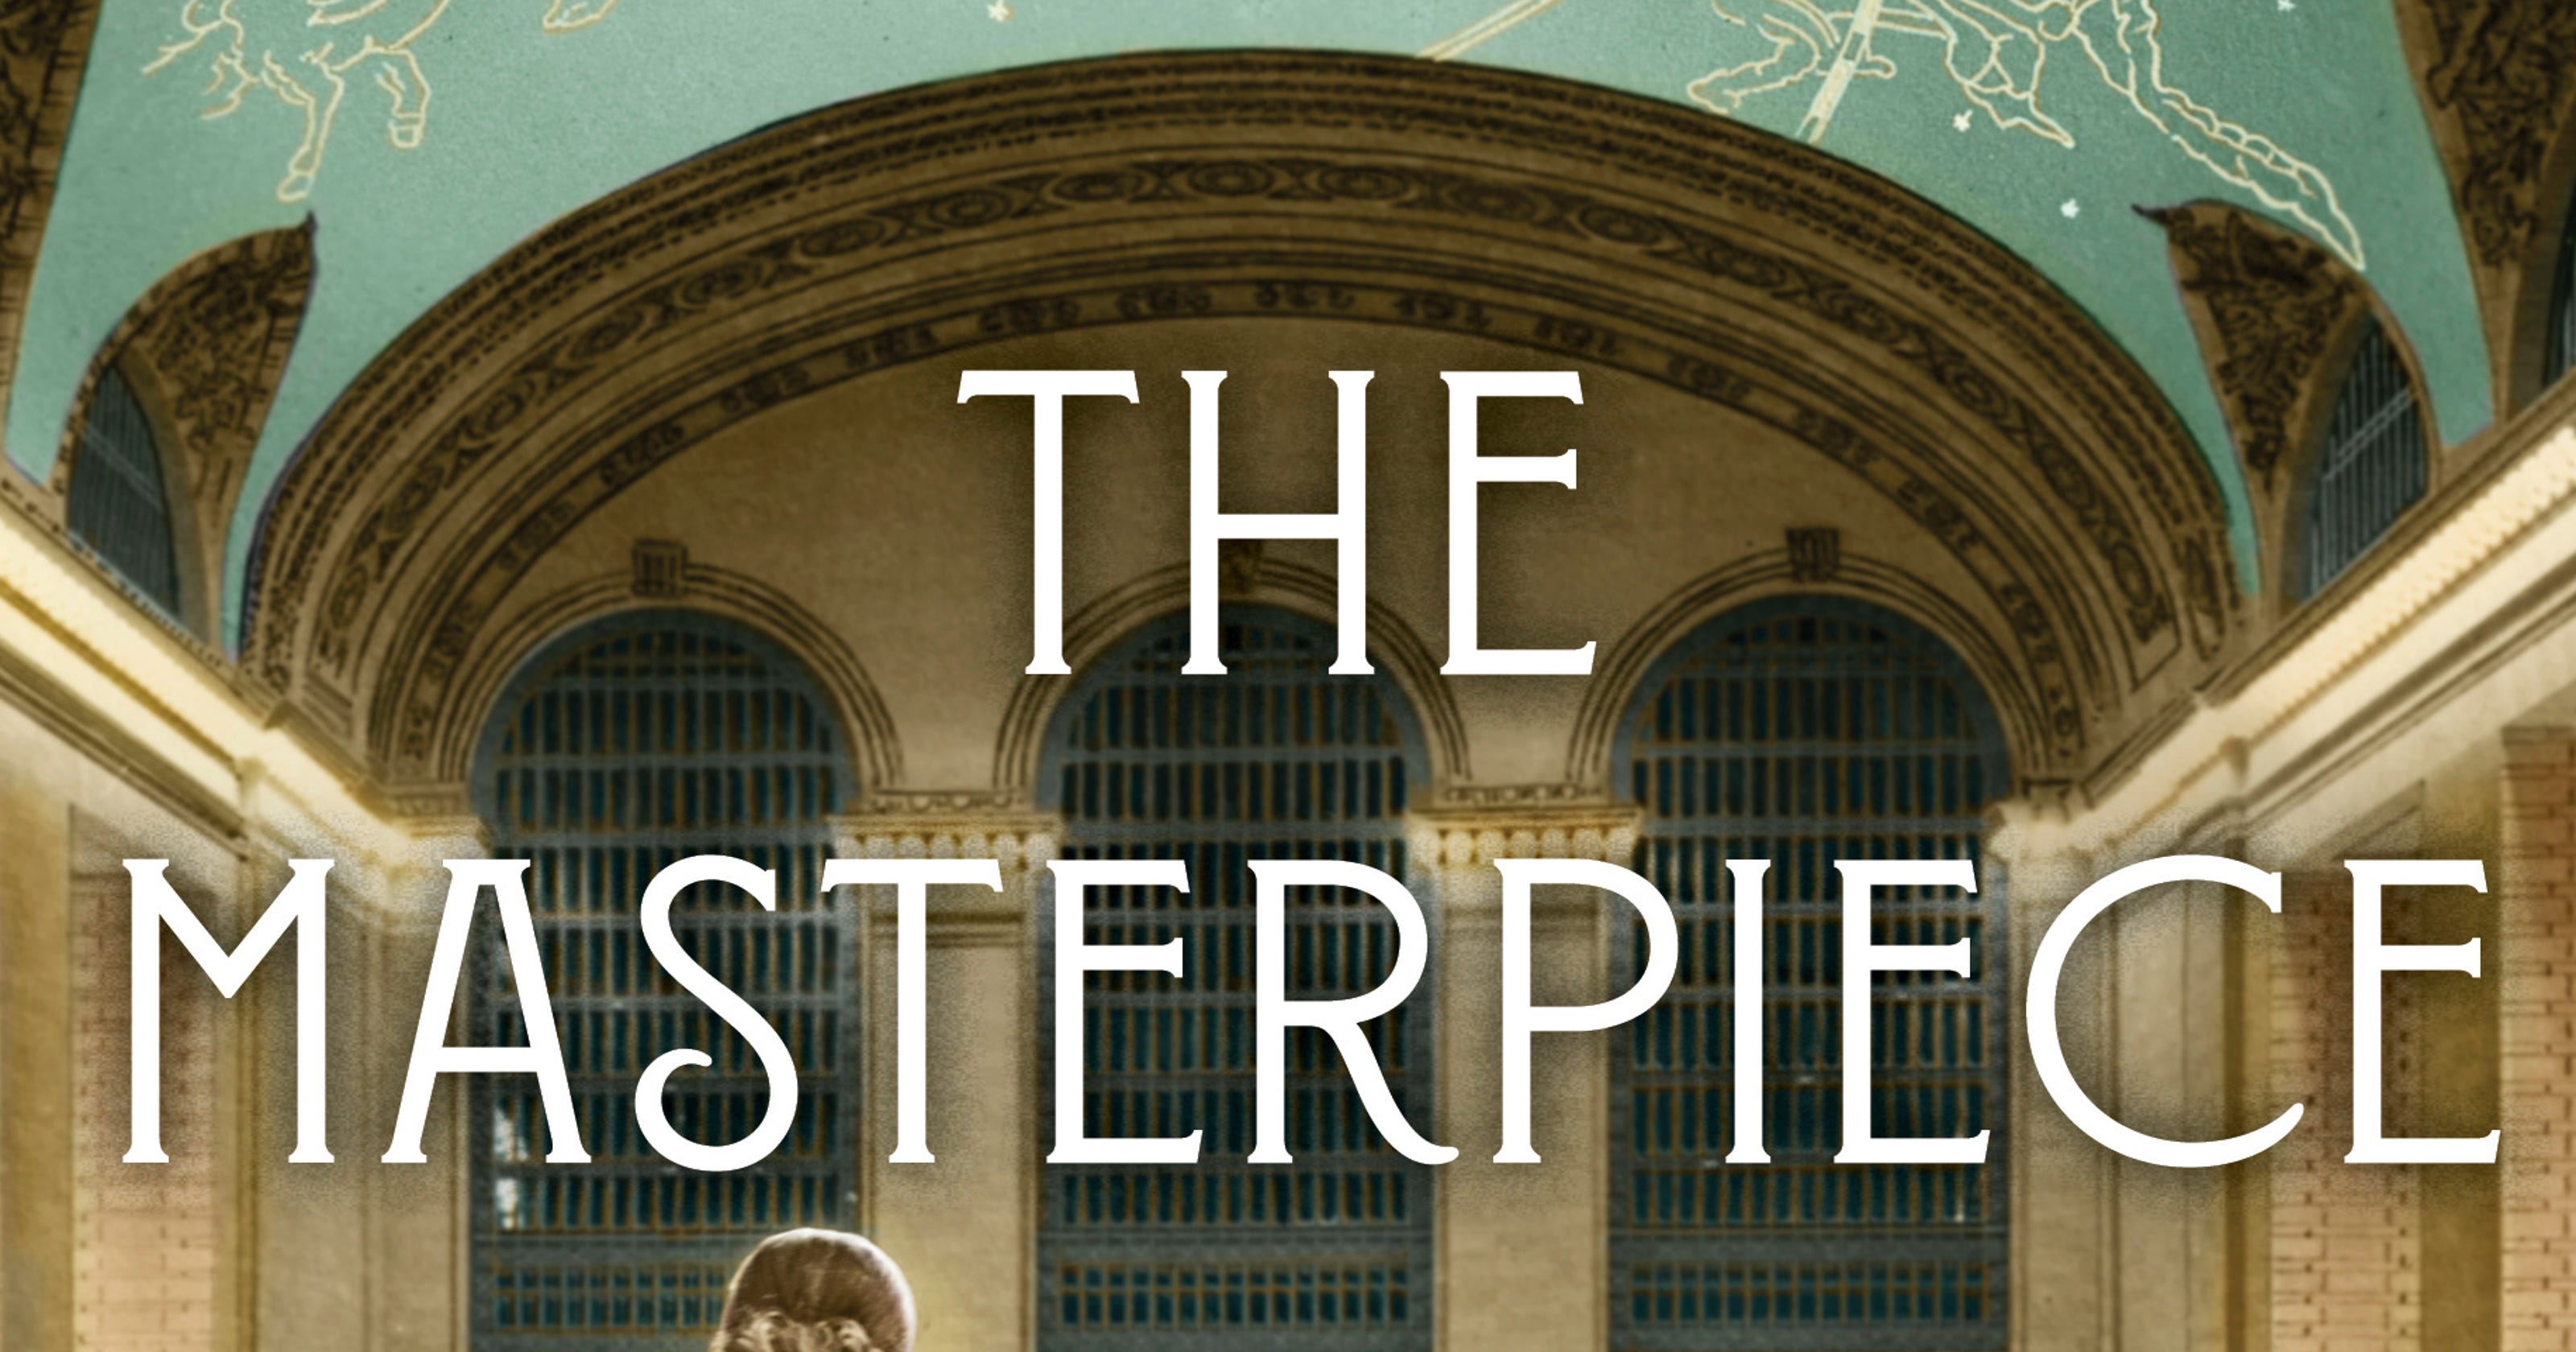 'The Masterpiece,' novel set in Grand Central's historic art school, is just the ticket